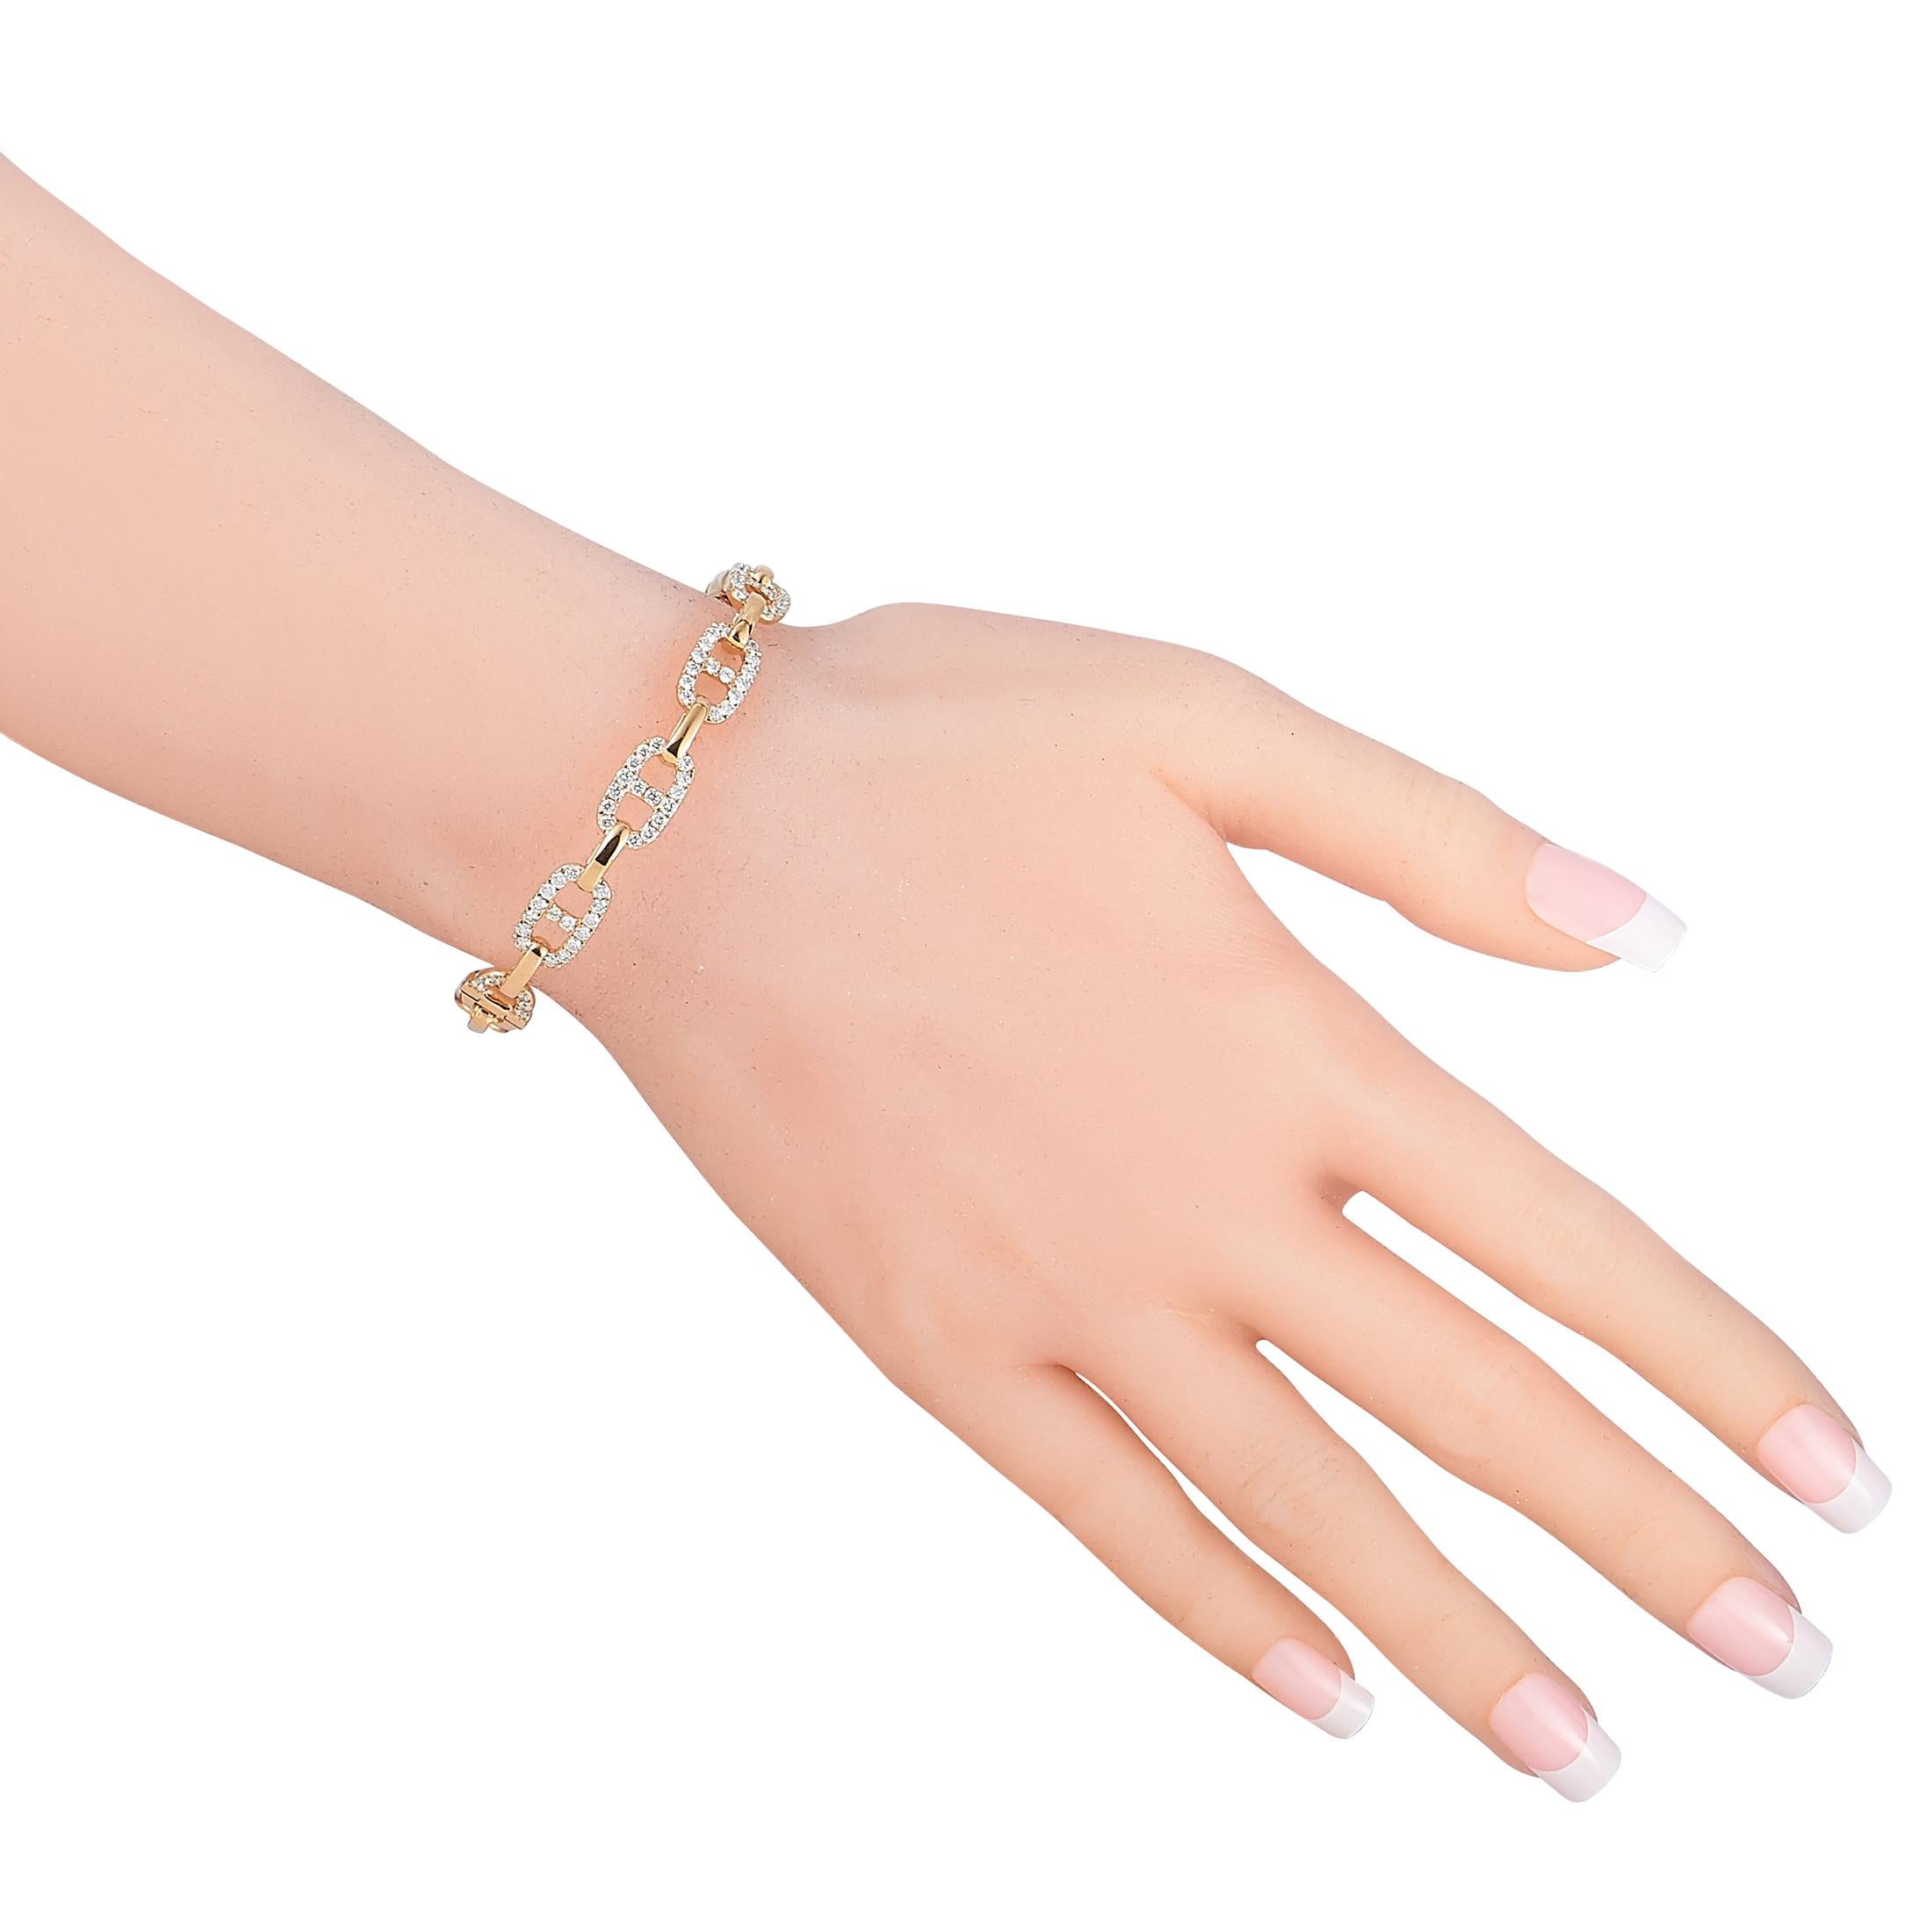 This LB Exclusive bracelet is crafted from 18K rose gold and weighs 23.5 grams, measuring 7” in length. The bracelet is embellished with diamonds that amount to 2.00 carats.

Offered in brand new condition, this jewelry piece includes a gift box.